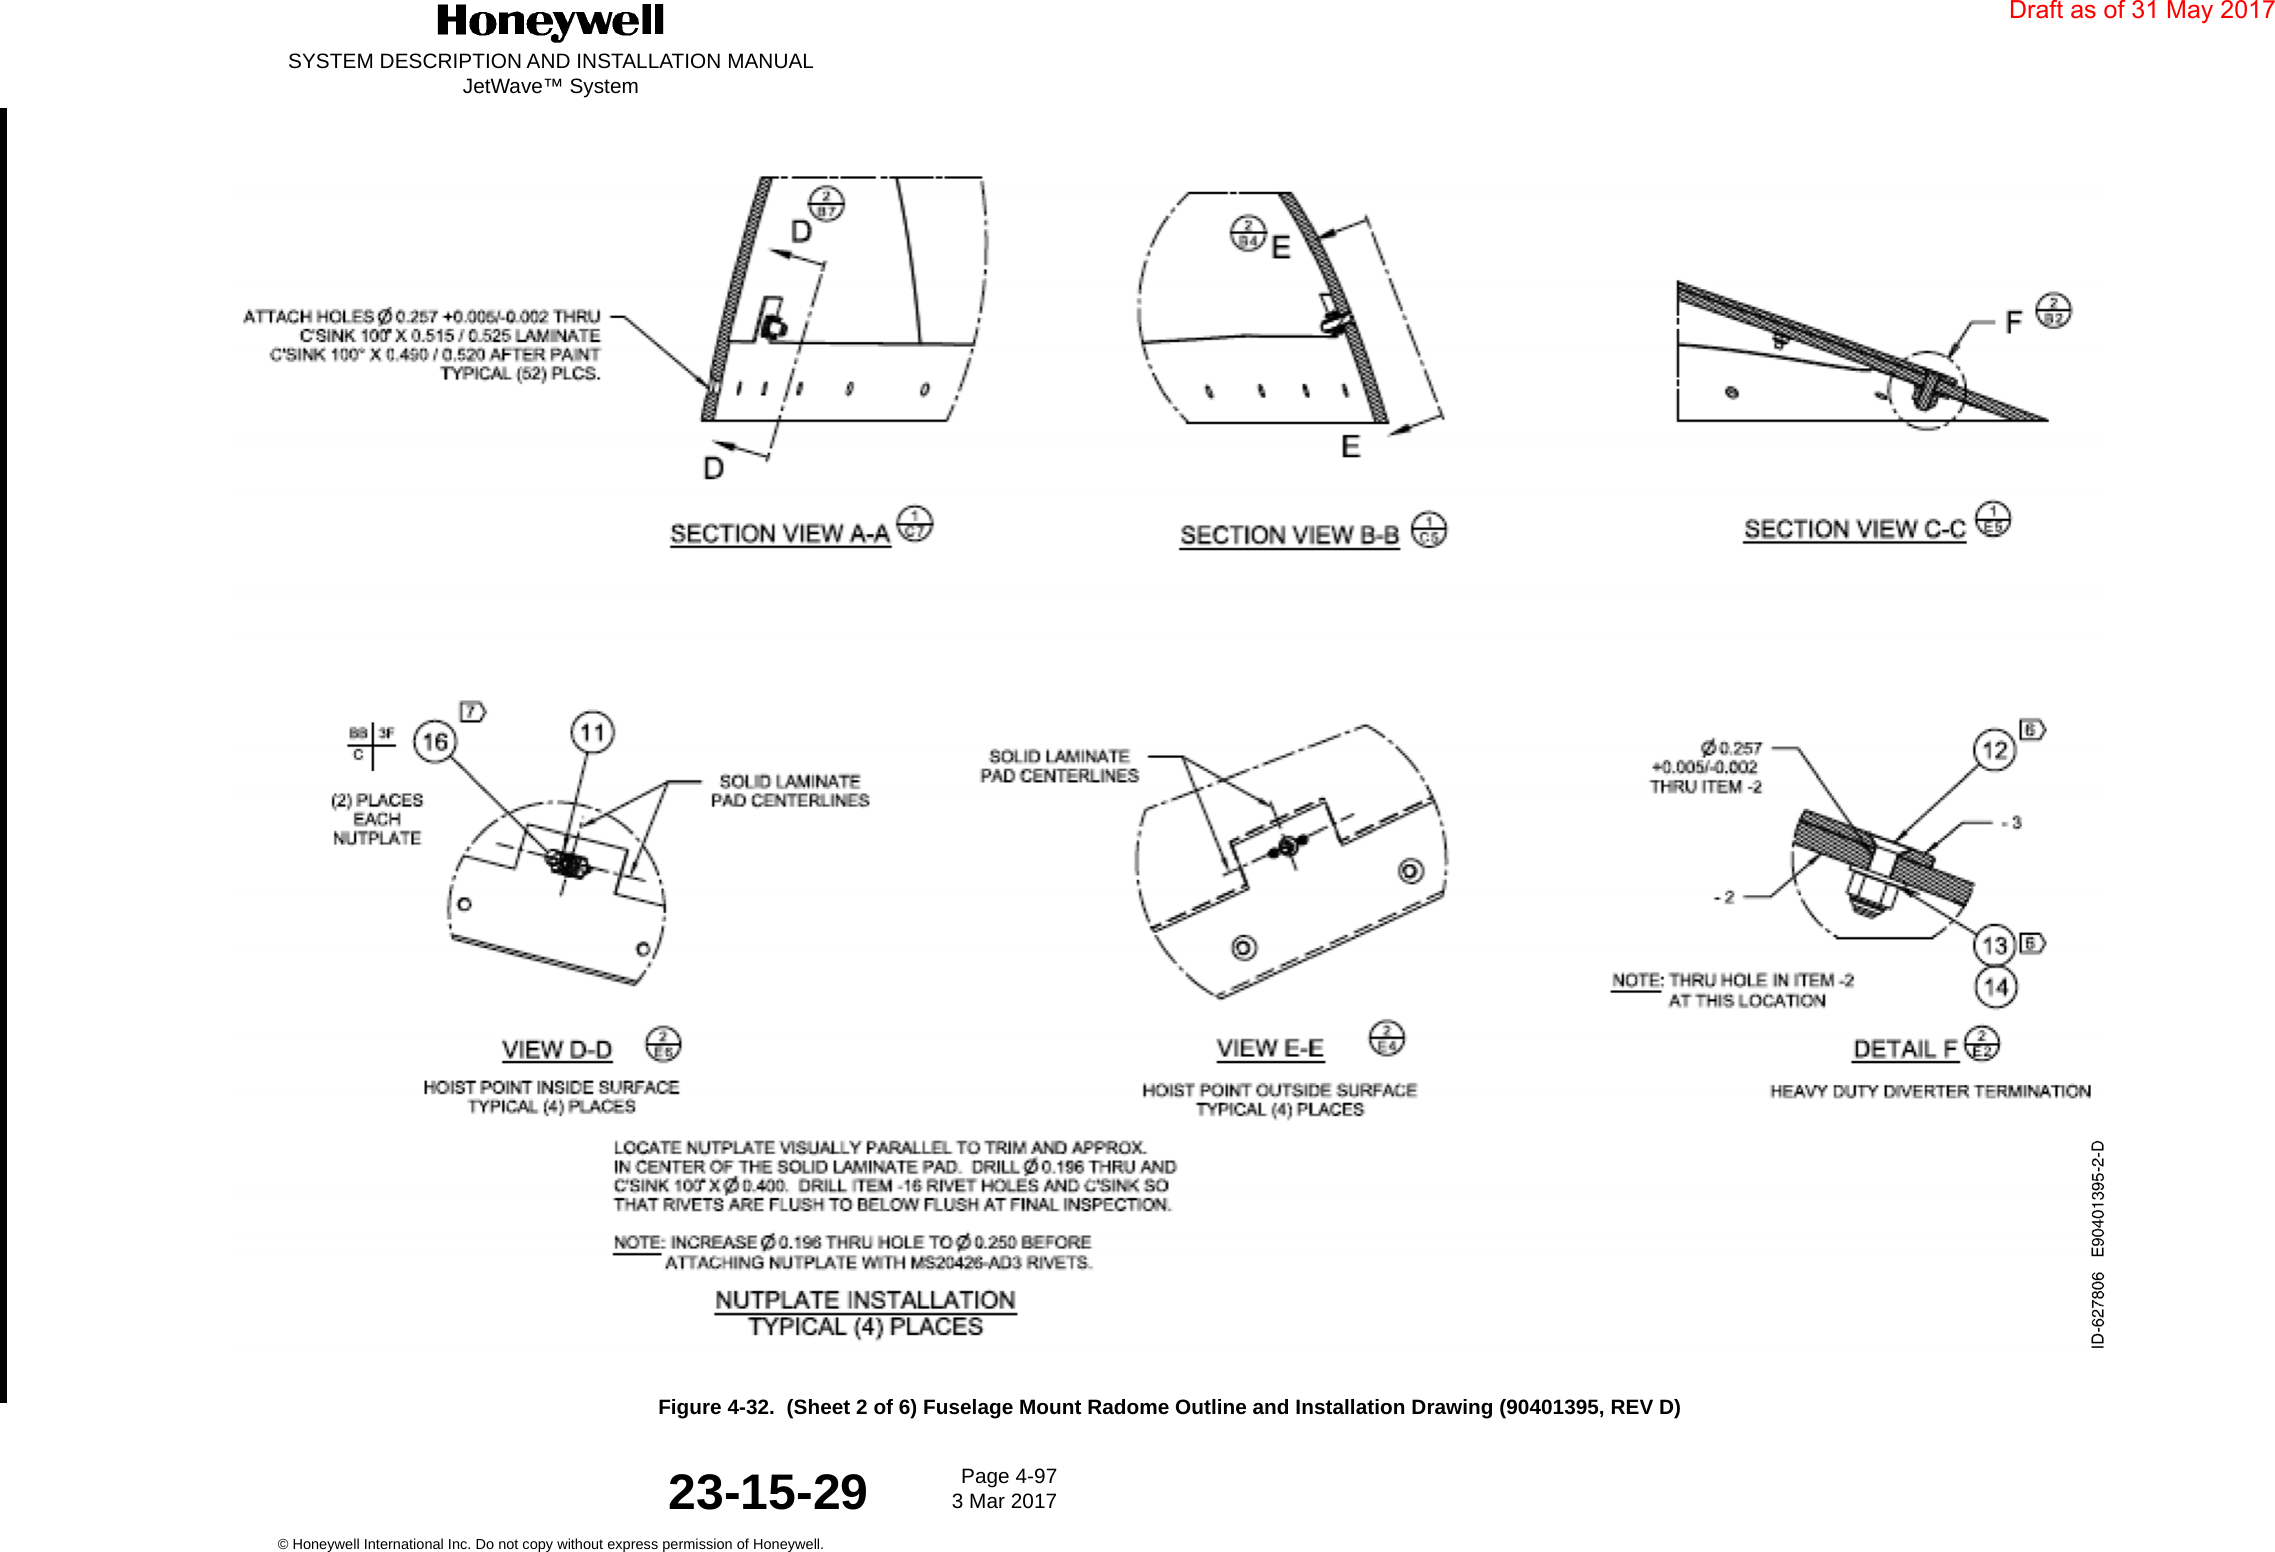 SYSTEM DESCRIPTION AND INSTALLATION MANUALJetWave™ SystemPage 4-97 3 Mar 2017© Honeywell International Inc. Do not copy without express permission of Honeywell.23-15-29Figure 4-32.  (Sheet 2 of 6) Fuselage Mount Radome Outline and Installation Drawing (90401395, REV D)Draft as of 31 May 2017